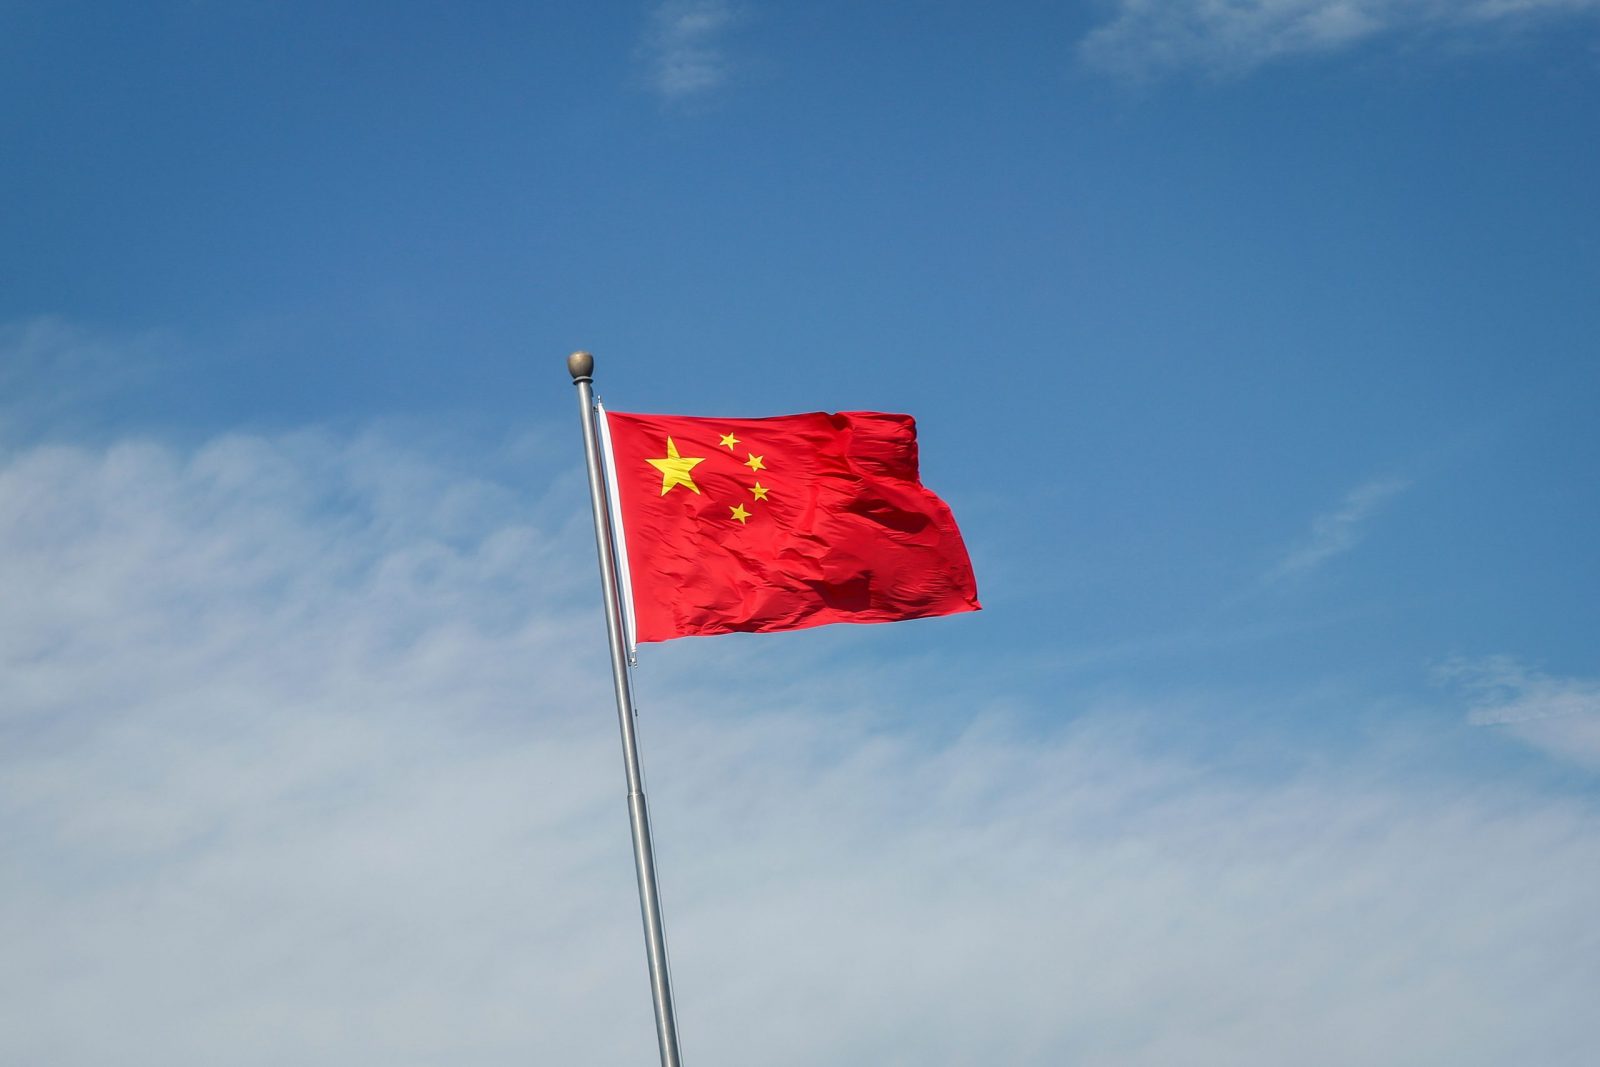 epa10133364 China's flag flutters along a road in Beijing, China, 22 August 2022. China has cut its benchmark loan rates to help revive its economy. China's one year loan prime rate was cut from 3.7 percent to 3.65 percent, while the loan rates for mortgages were cut from 4.45 percent to 4.3 percent, the People's Bank of China (PBOC) said.  EPA/MARK R. CRISTINO